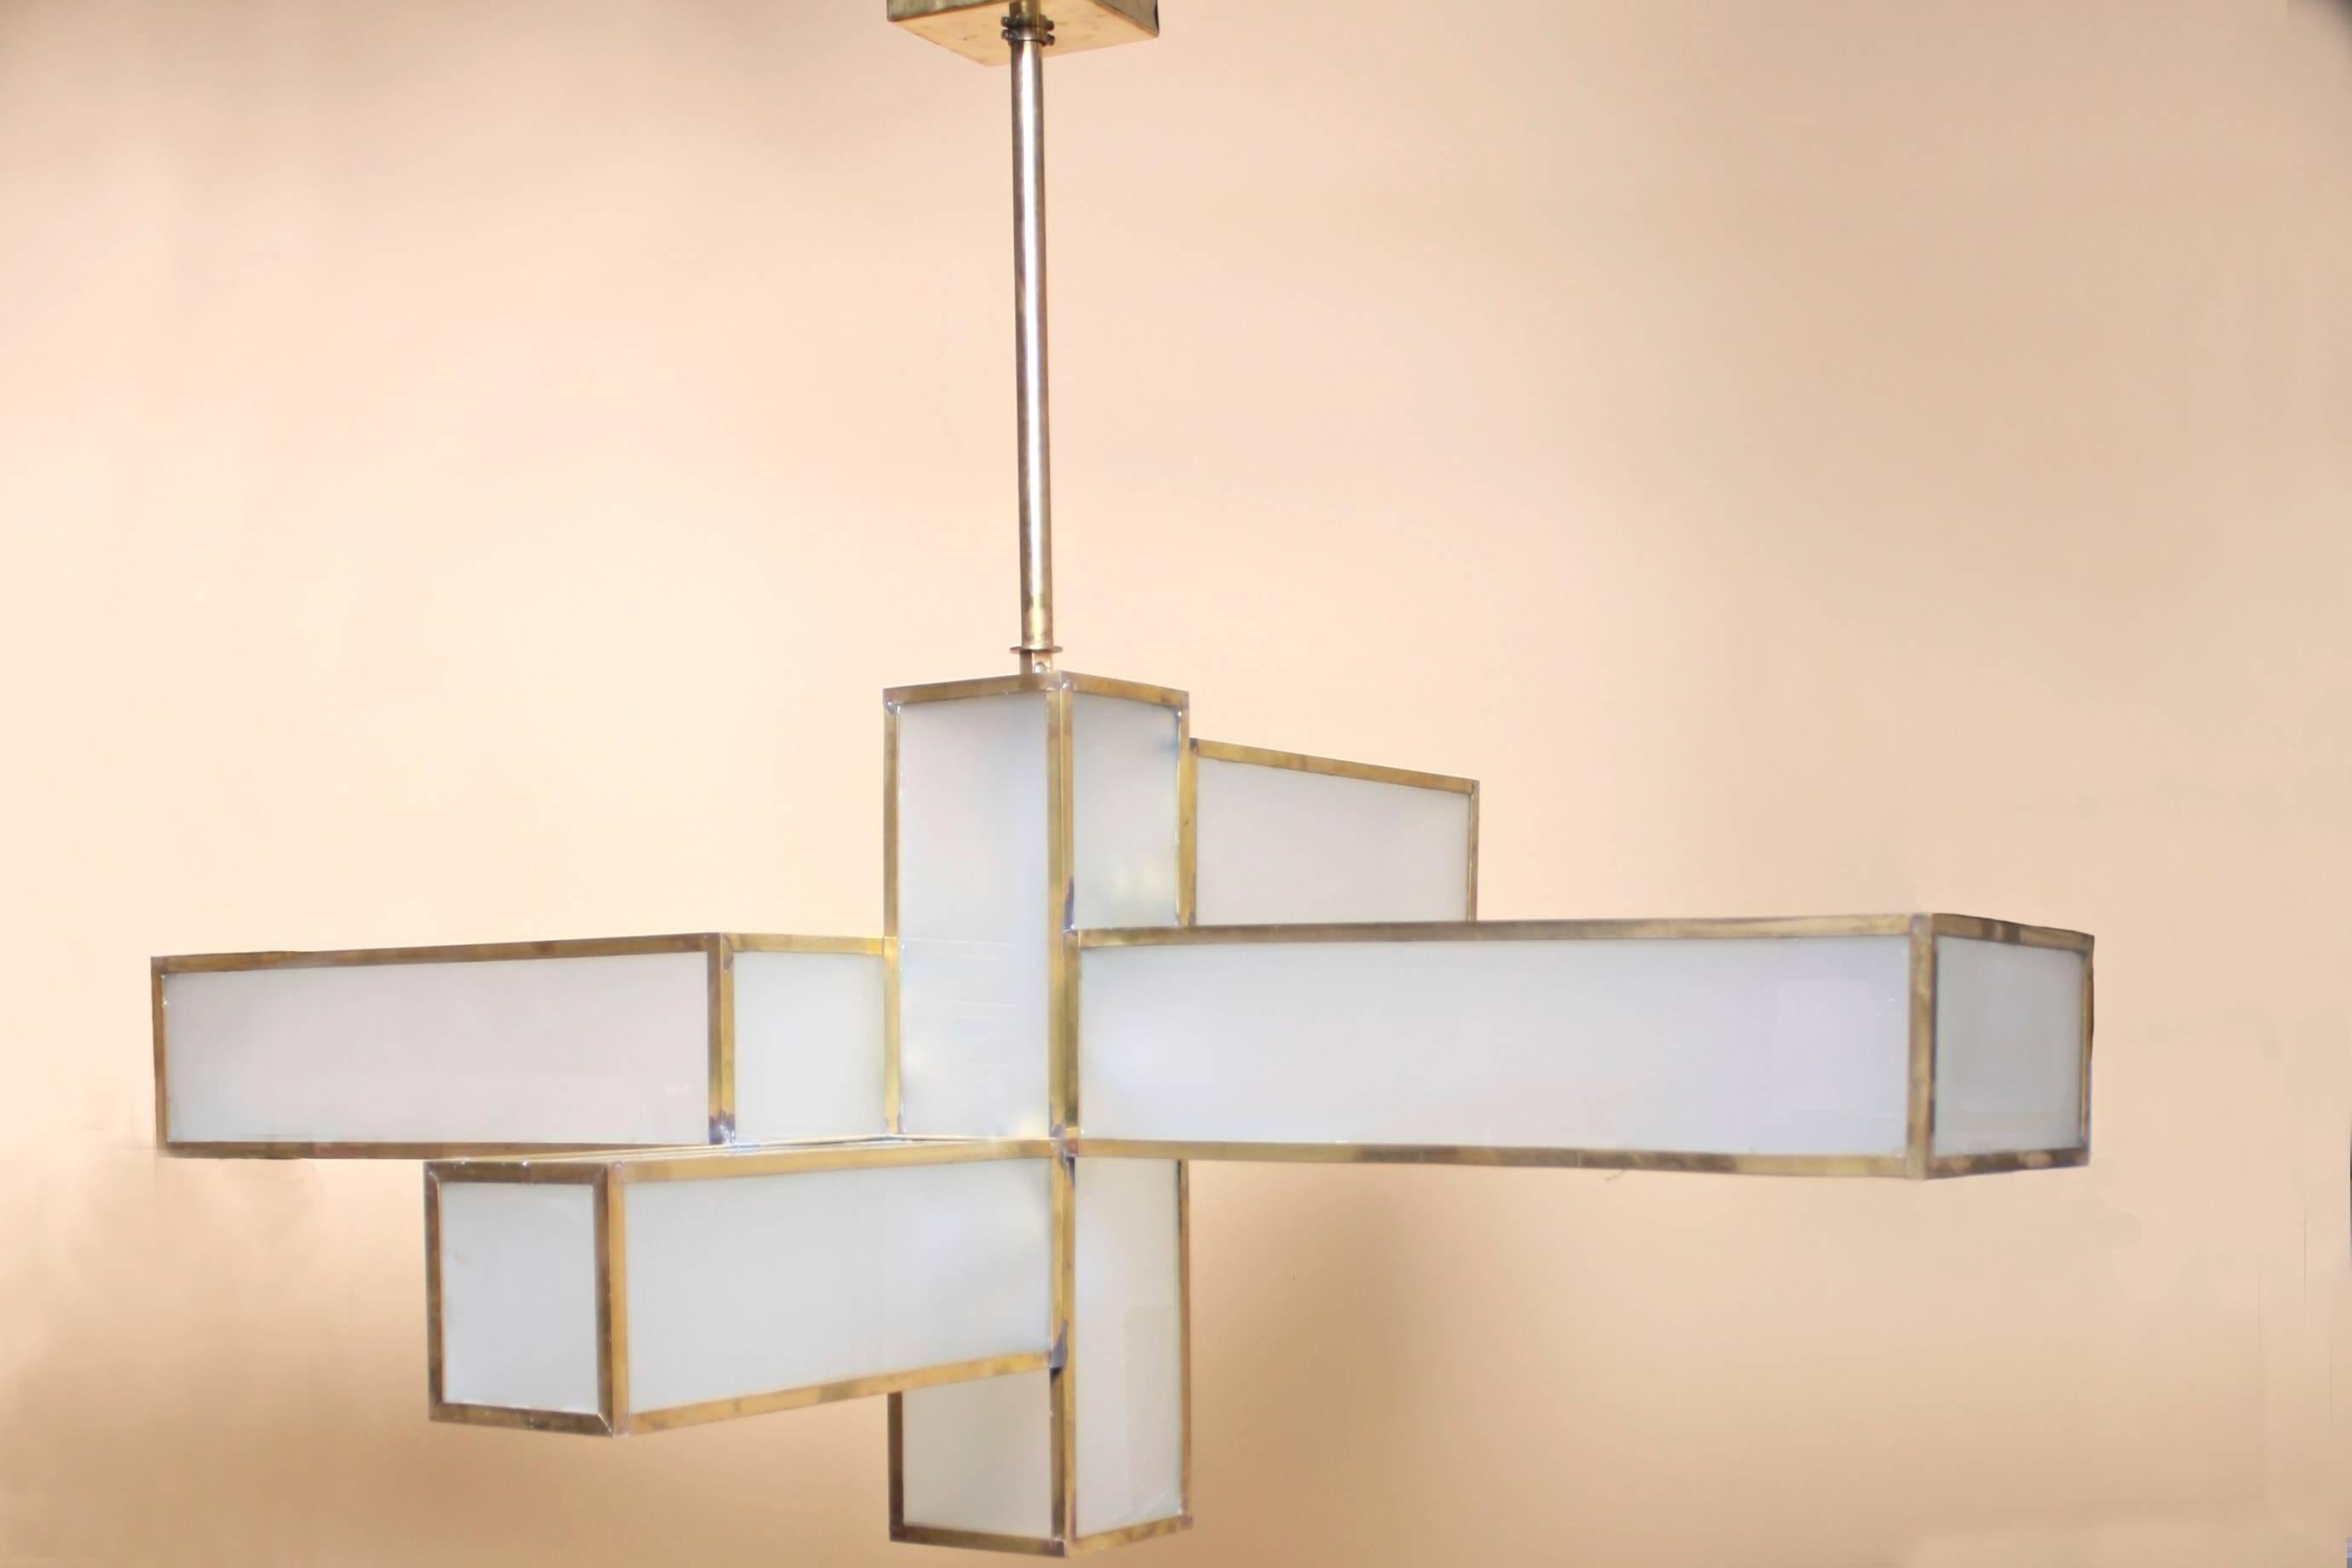 A large-scale, gorgeous chandelier made from opaque glass, forged brass and perforated brass shades along the bottom of the fixture. The fixture takes on a different shape depending on the angle from which it is viewed. Truly spectacular. Found in